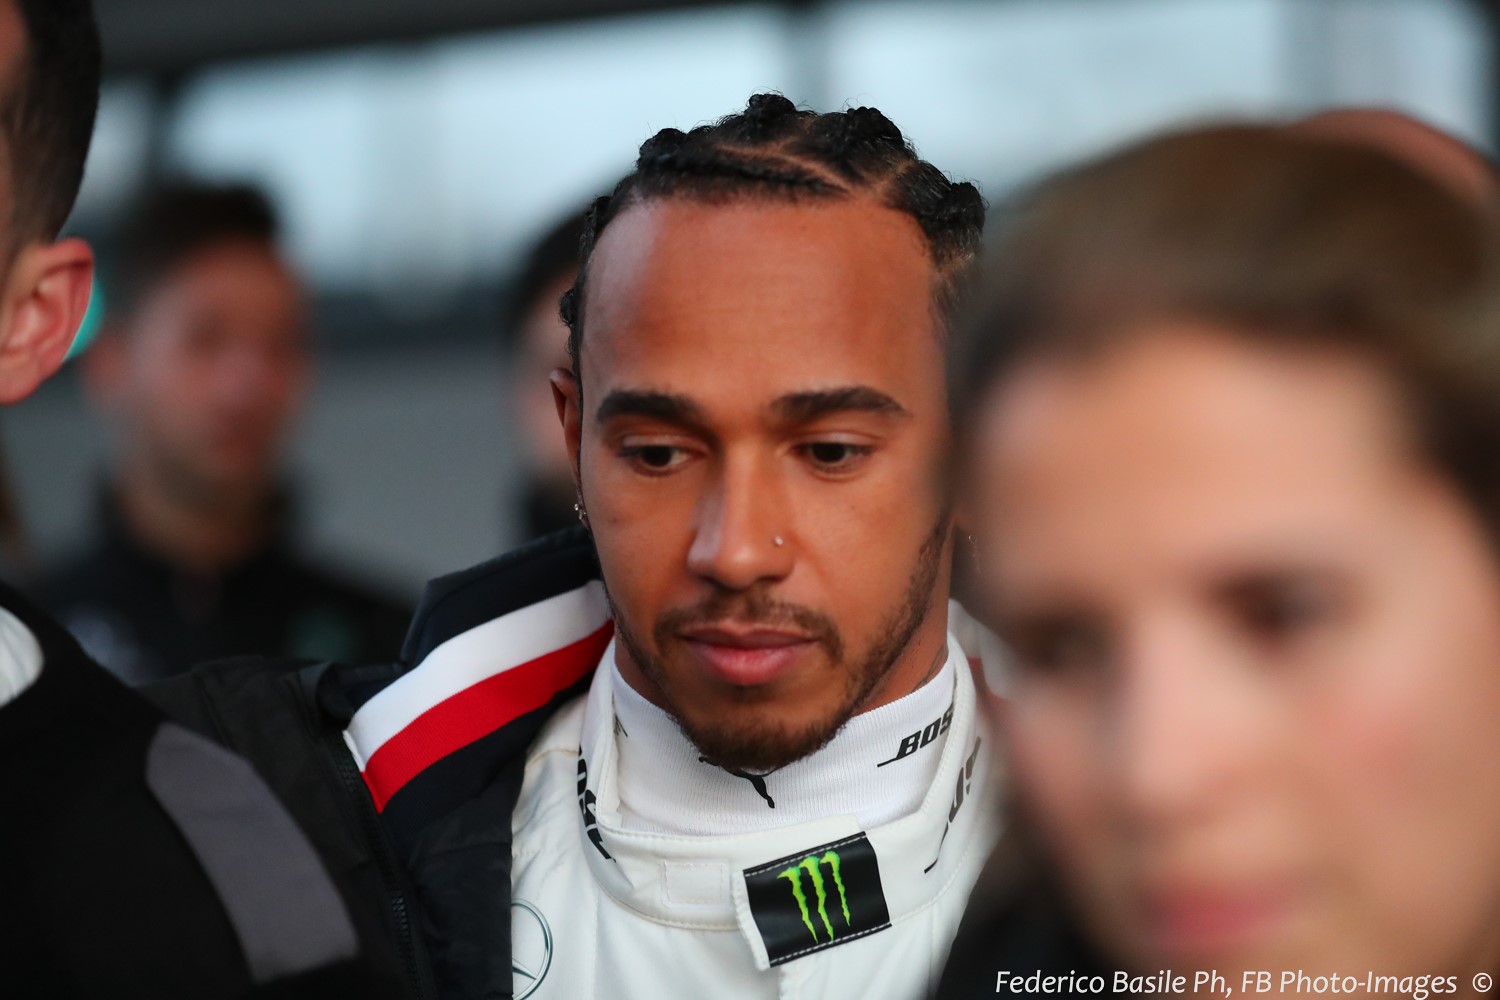 Lewis Hamilton avoids the Race of Champions and IndyCar where he can't drive the superior Mercedes he has in F1